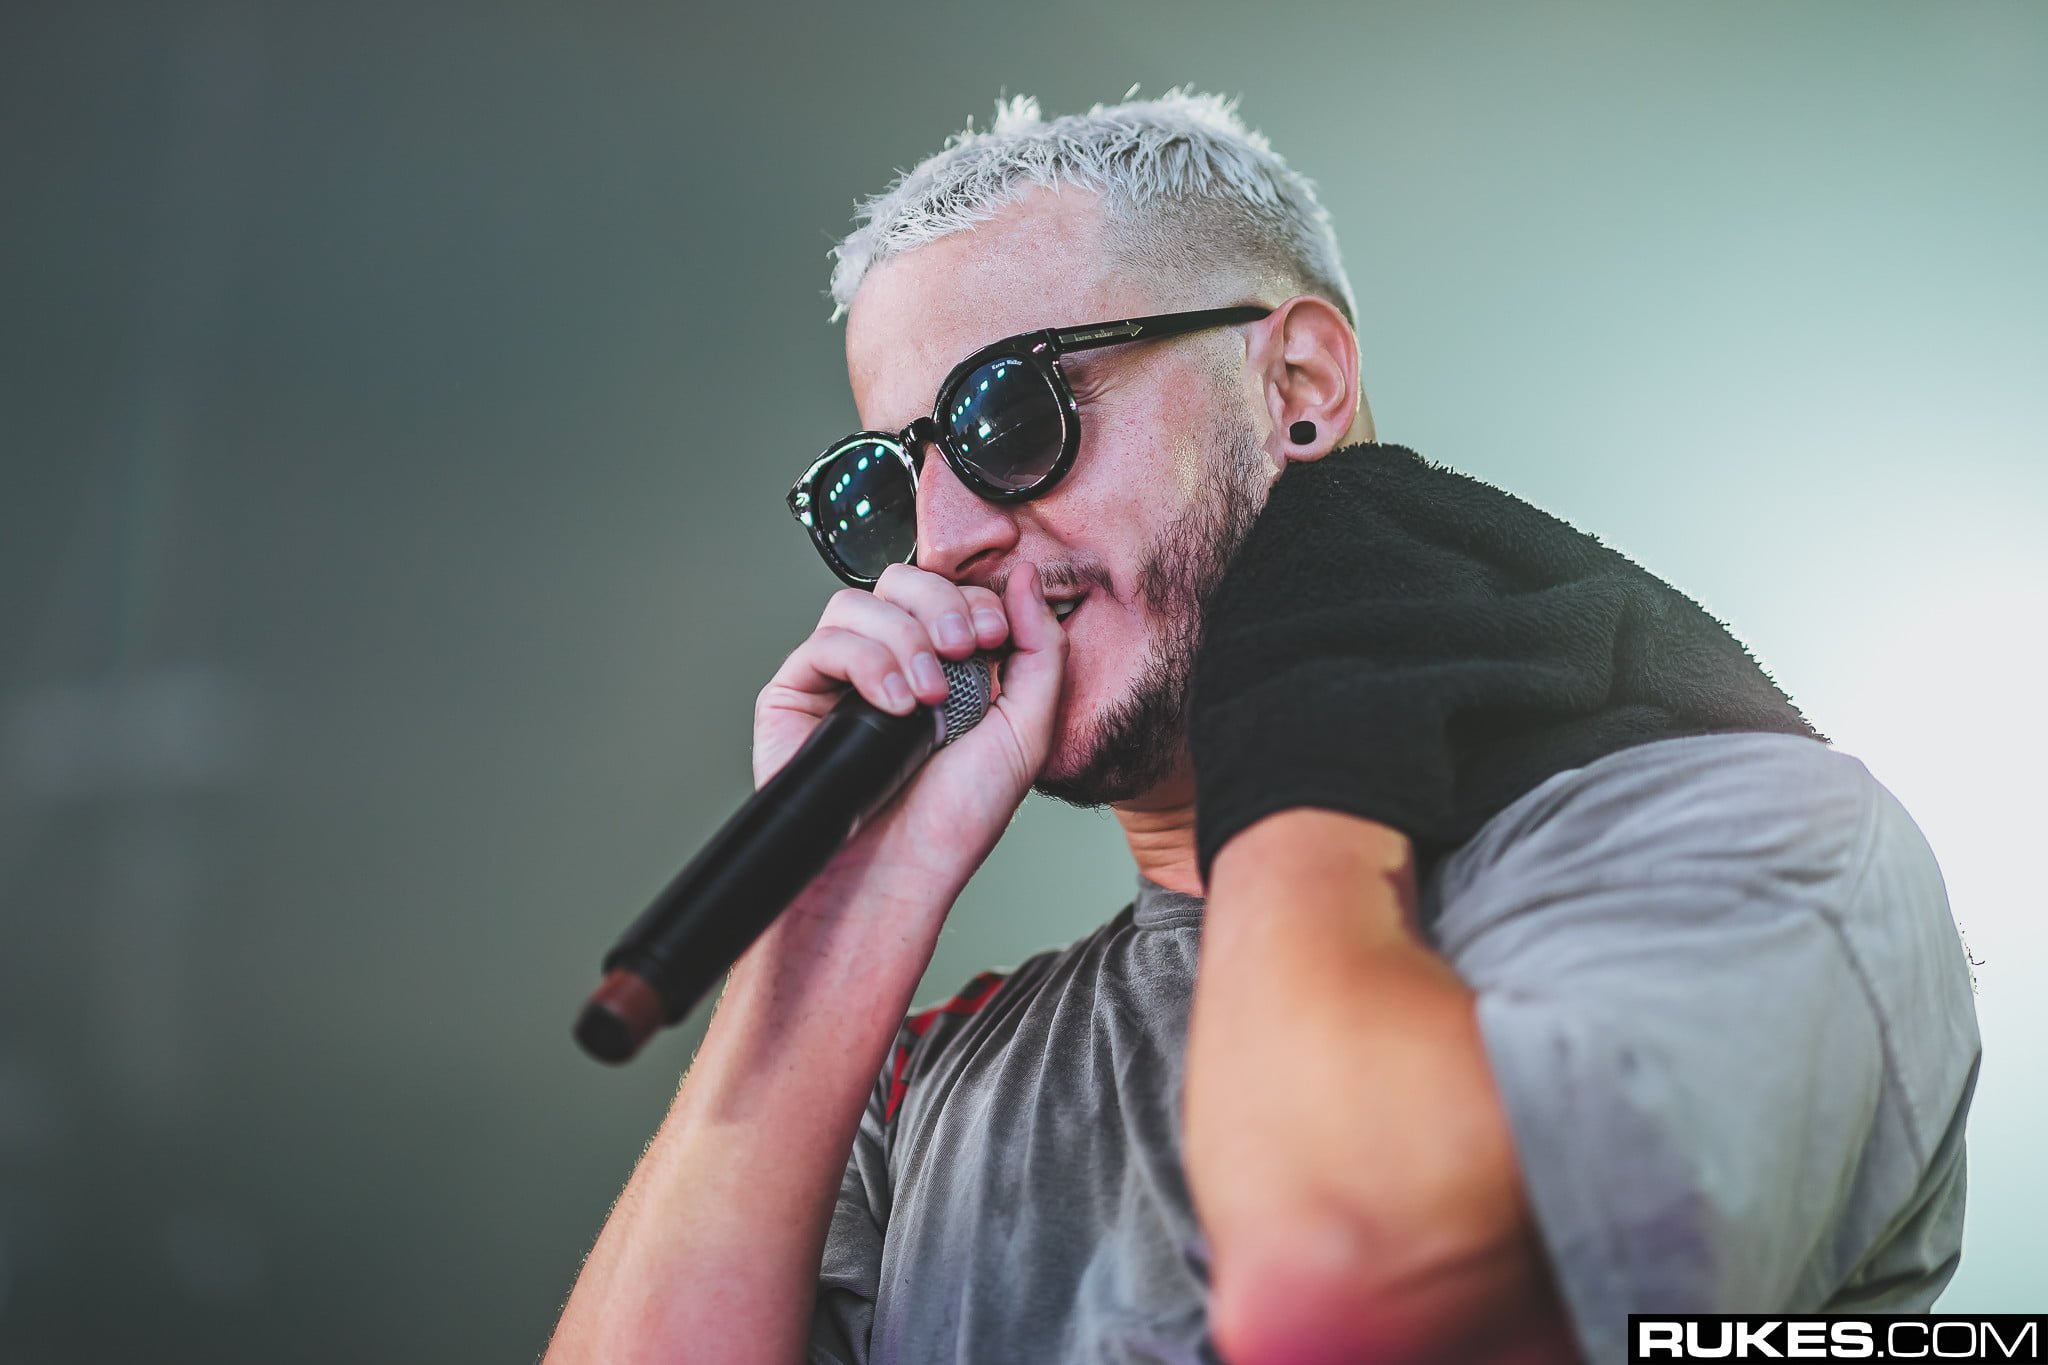 DJ Snake shares cryptic post revealing ‘The Final Show’